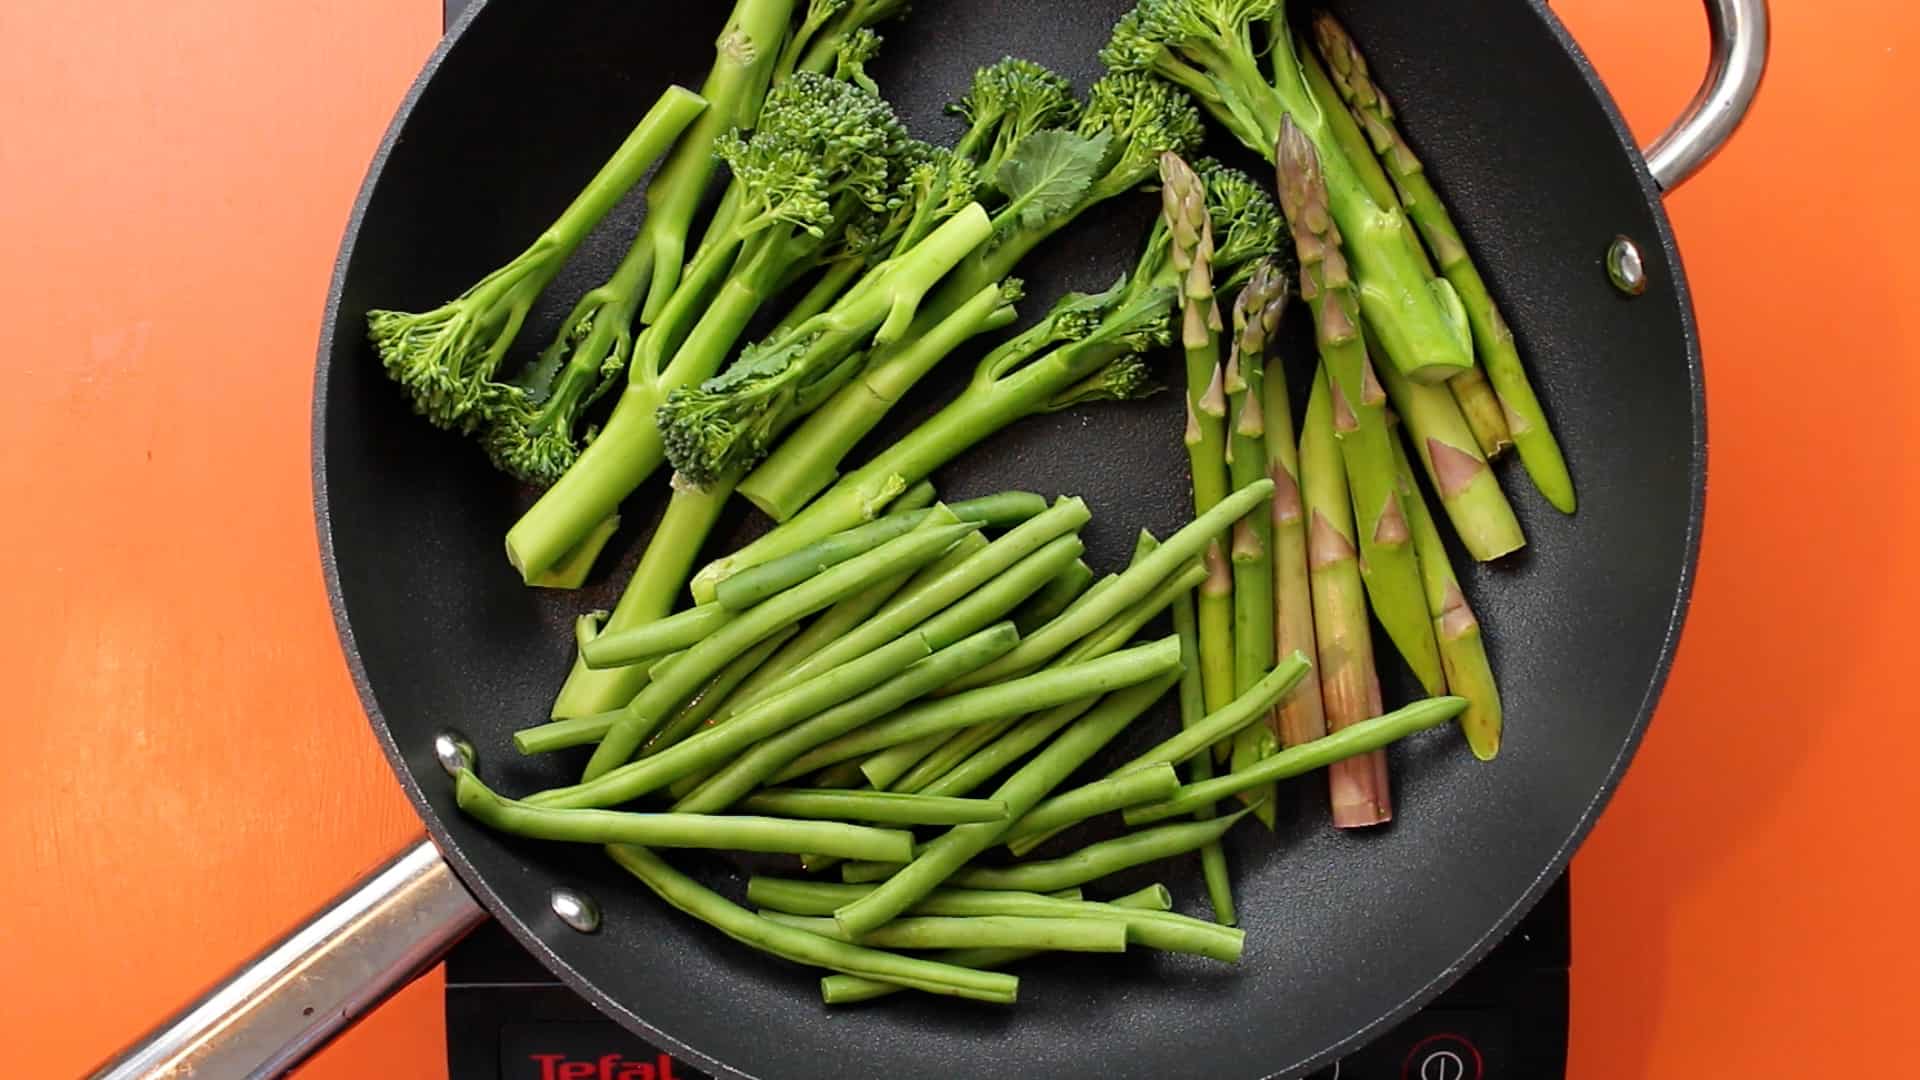 Broccoli stems and asparagus in large frying pan on a stove on an orange background.